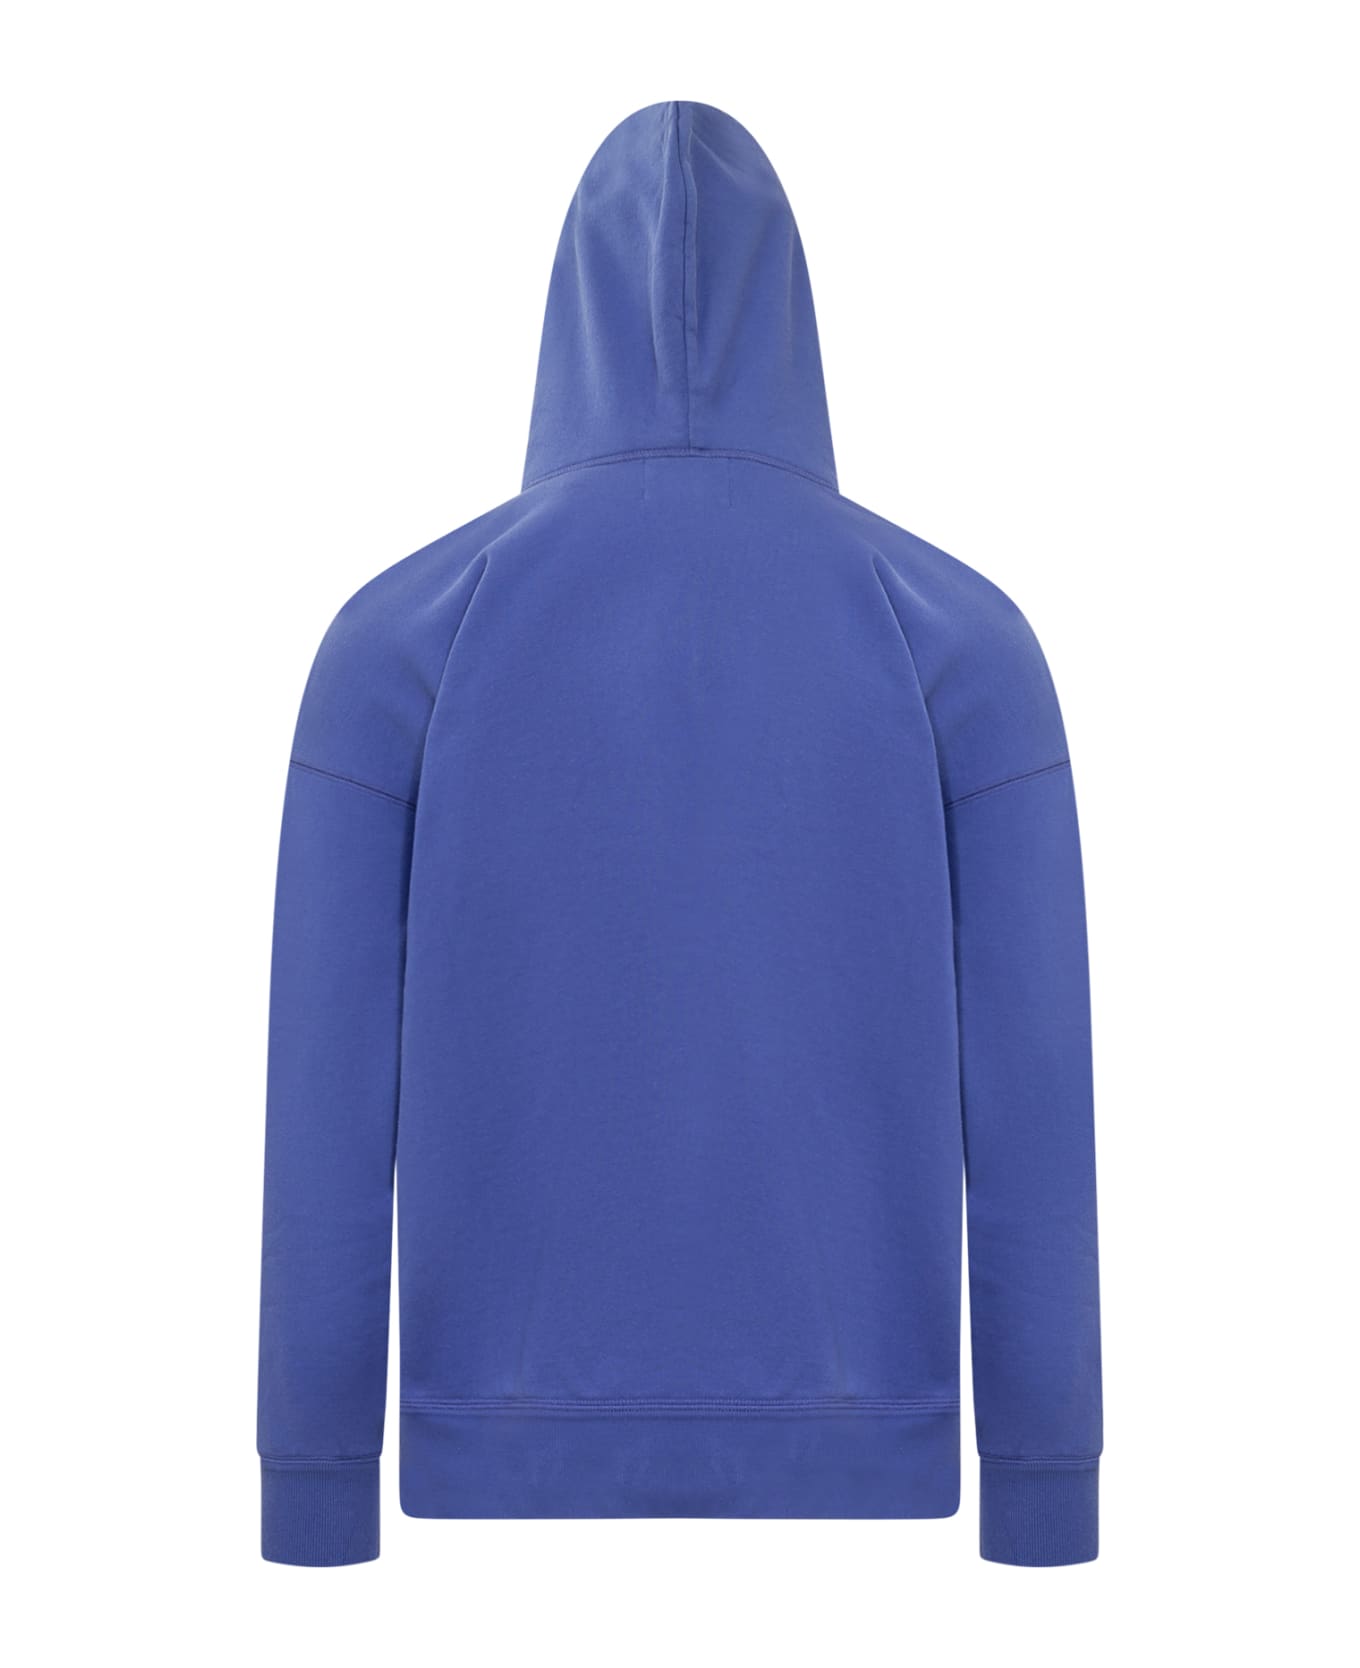 Isabel Marant Miley Logo Cotton Hoodie - ELECTRIC BLUE